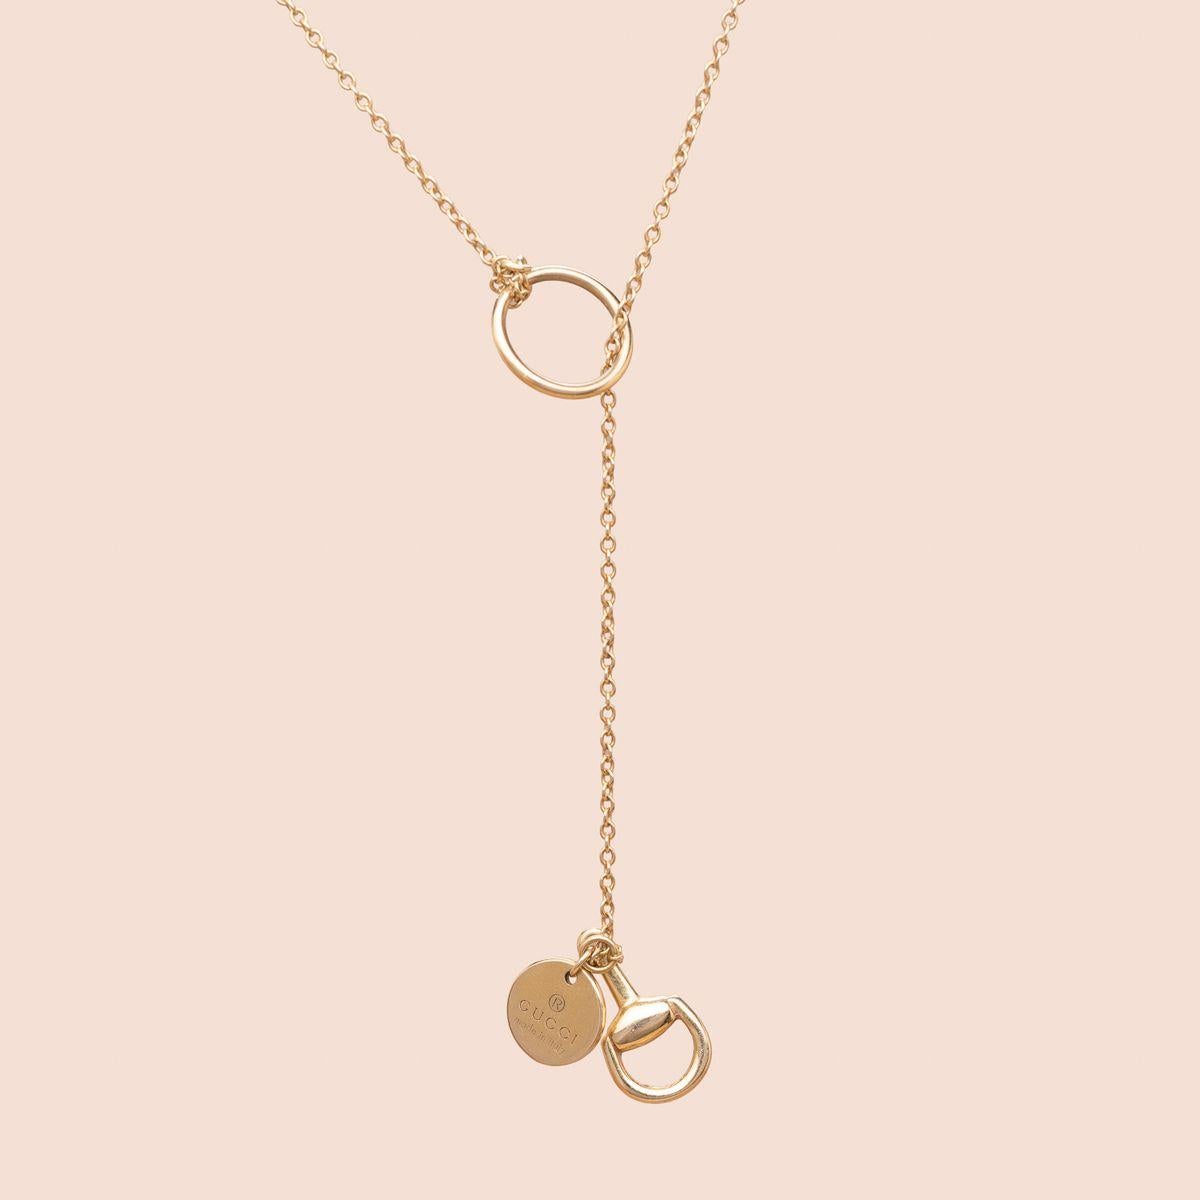 Gucci. Vintage 1990s. Sliding 18K gold necklace featuring a horse bridle bit knot. 
Signed along with the copyright symbol 
Italian made
Lenght : around 50cm 
Gross weight : 3.96g

______________________-

Gucci. Années 1990. Collier cravate ou